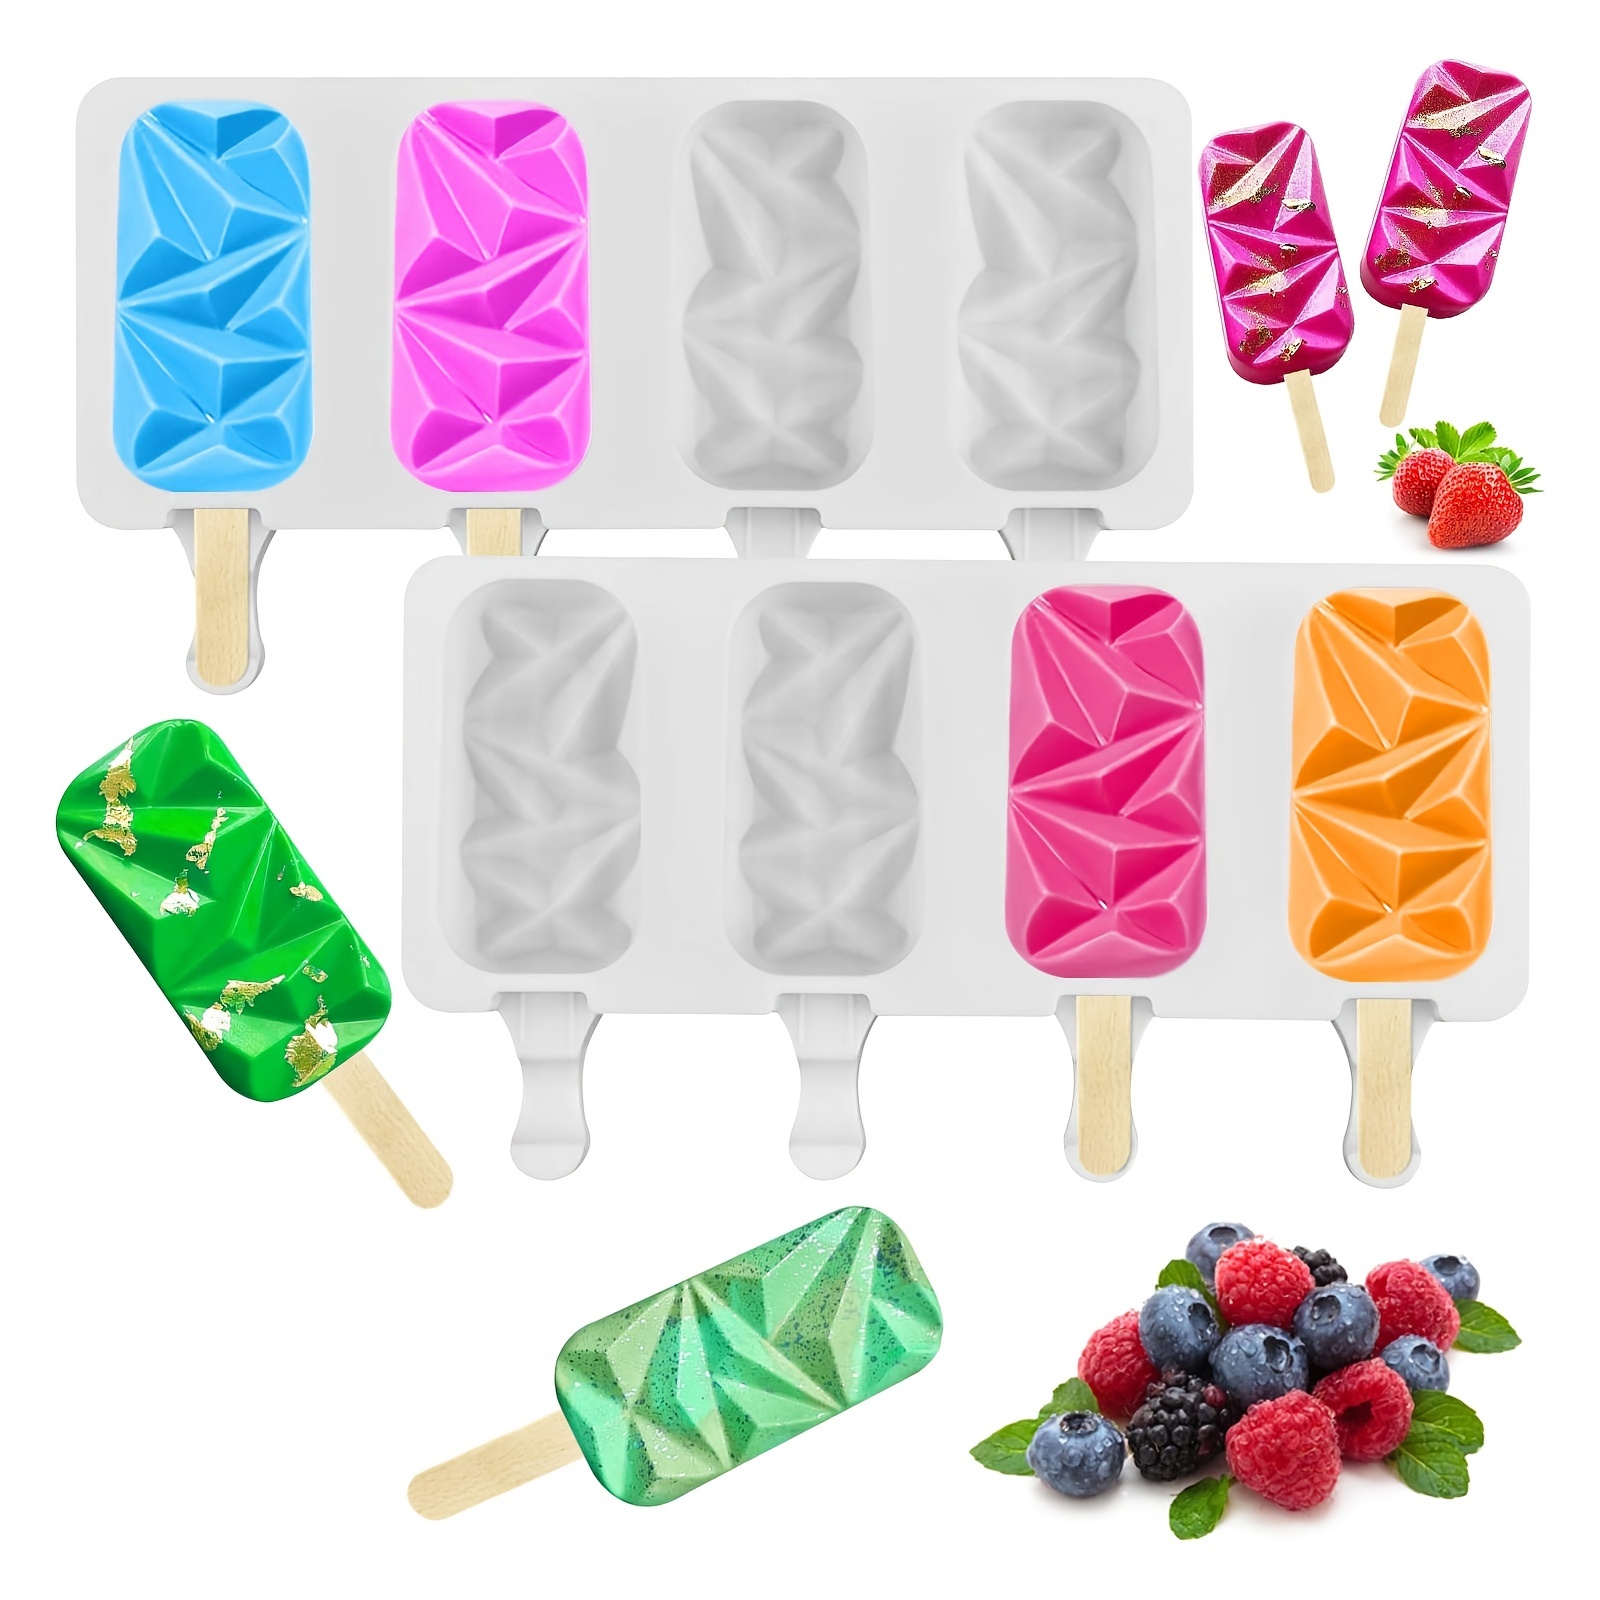 SILICON CAKESICLES POPSICLES MOLD 4 CAVITY WITH STICK – Bakers